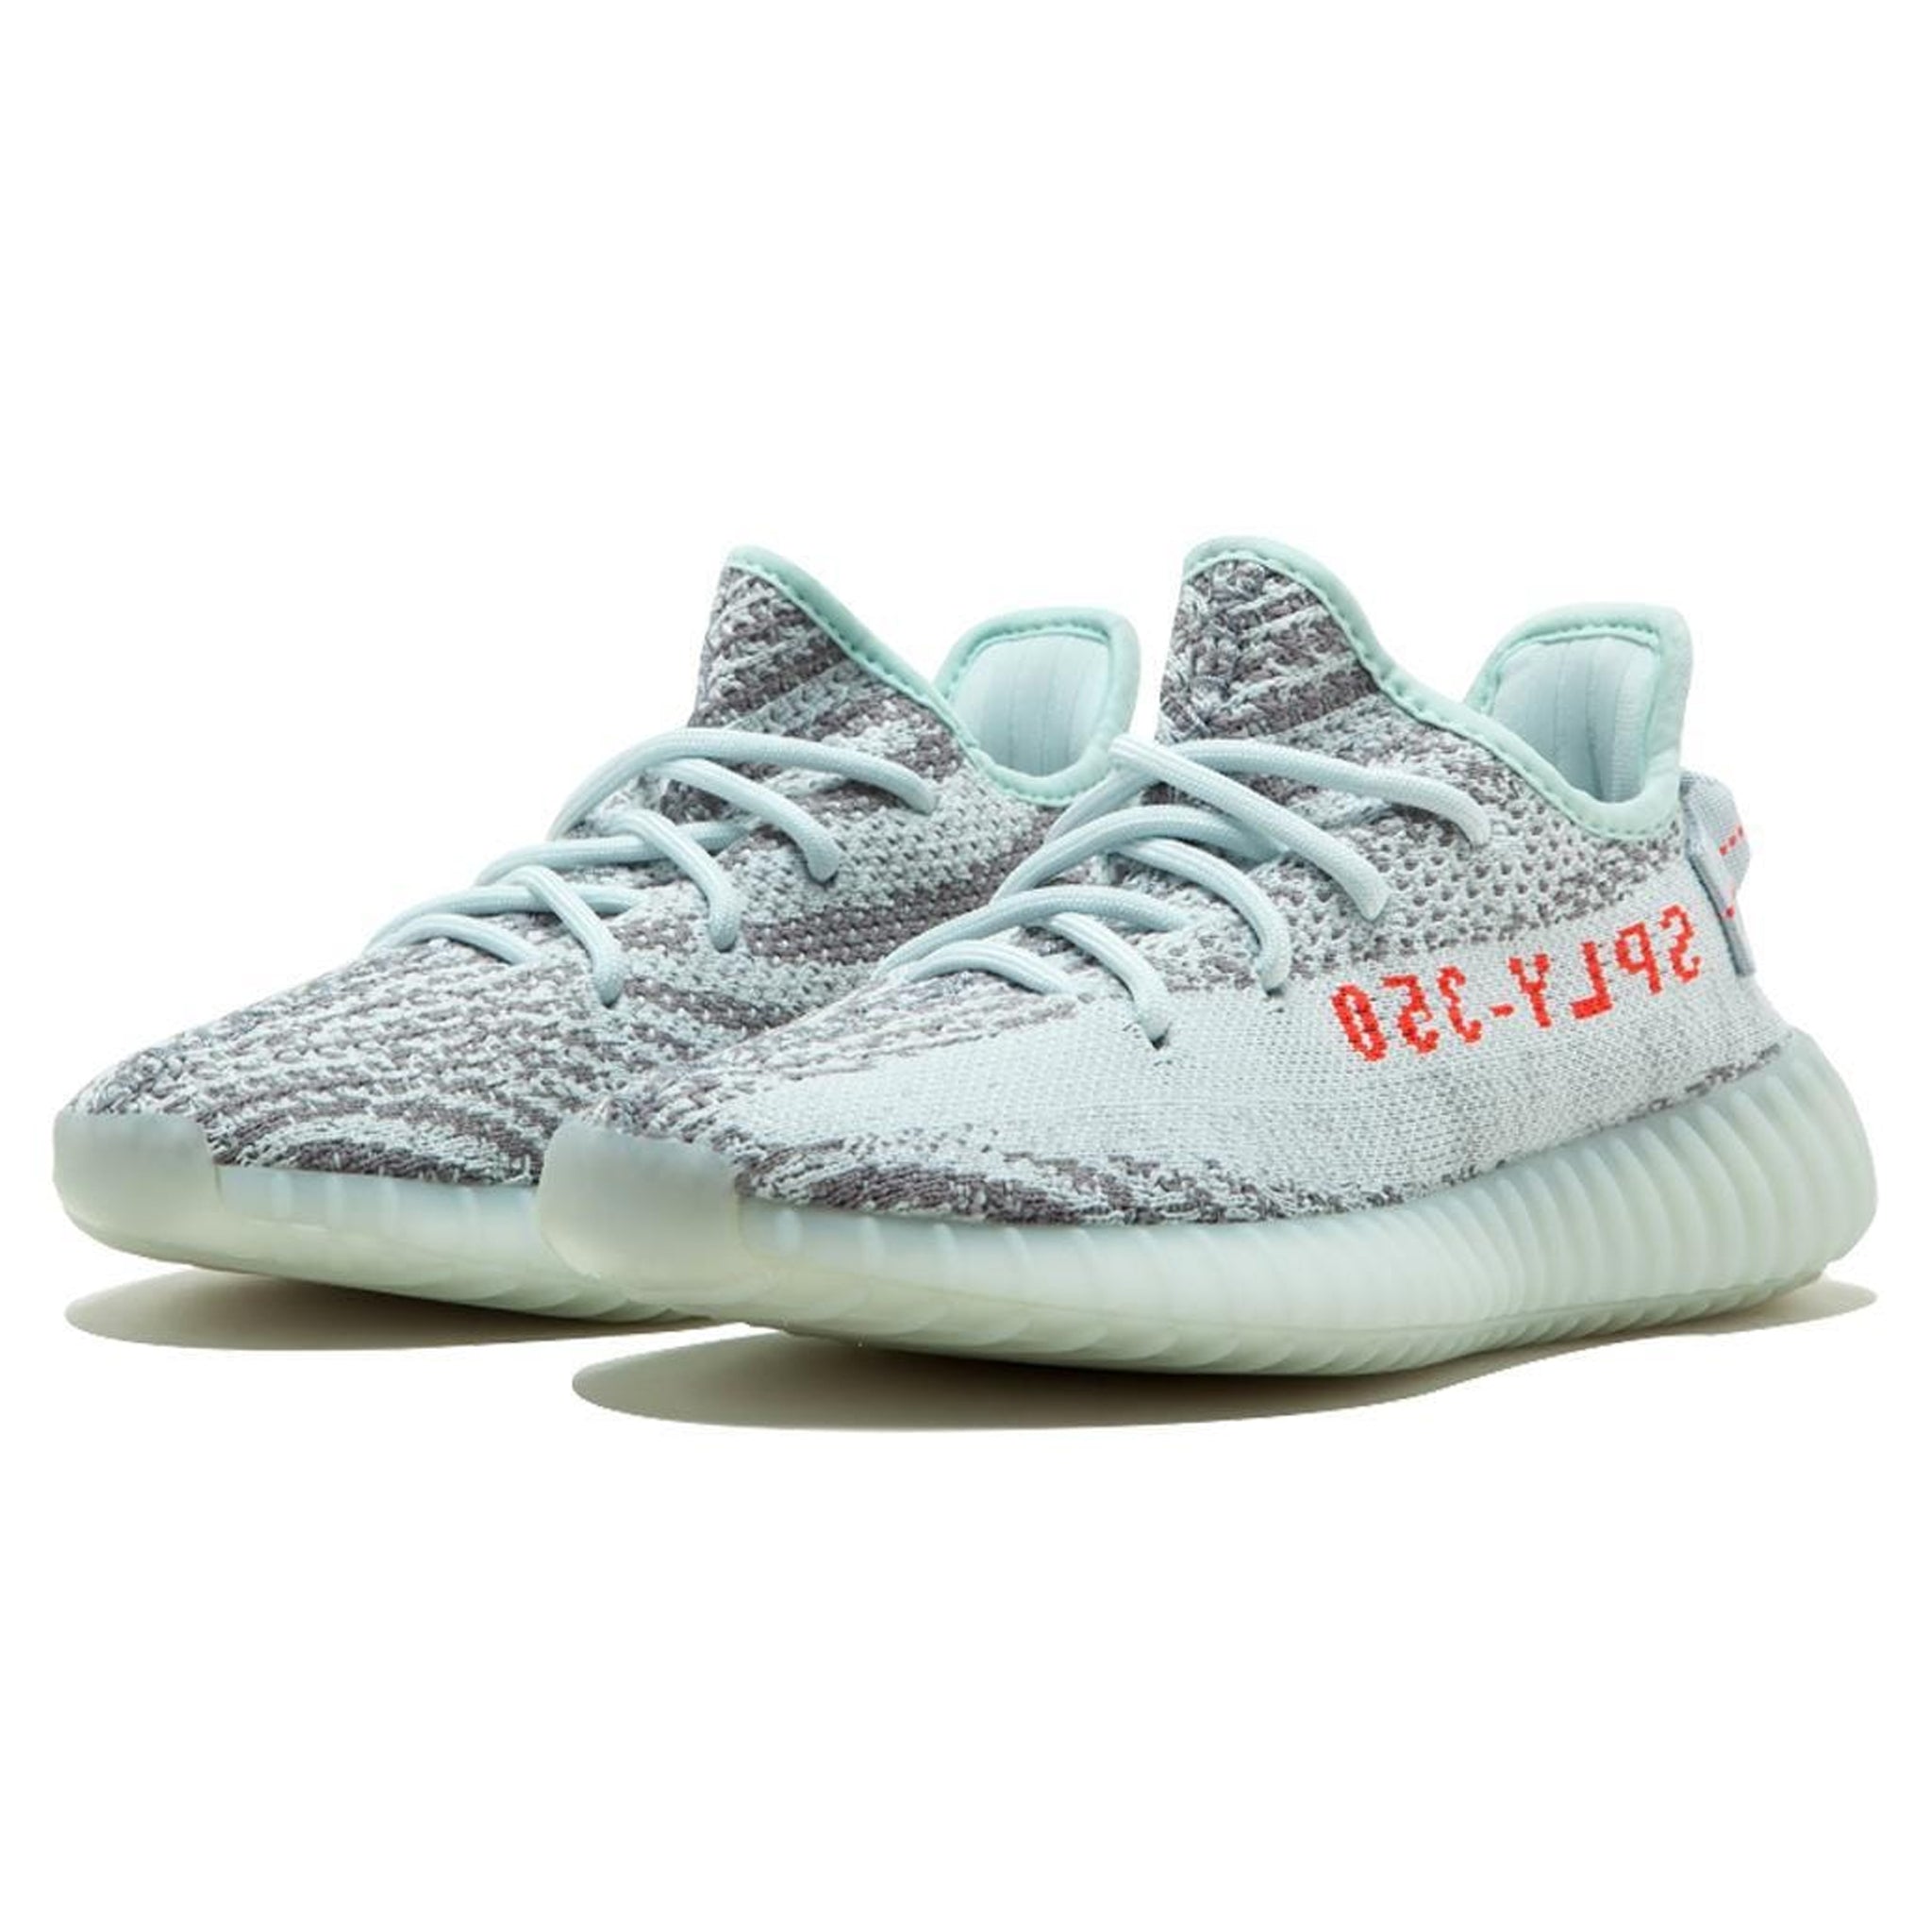 Front side view of Adidas Yeezy Boost 350 V2 Blue Tint B37571